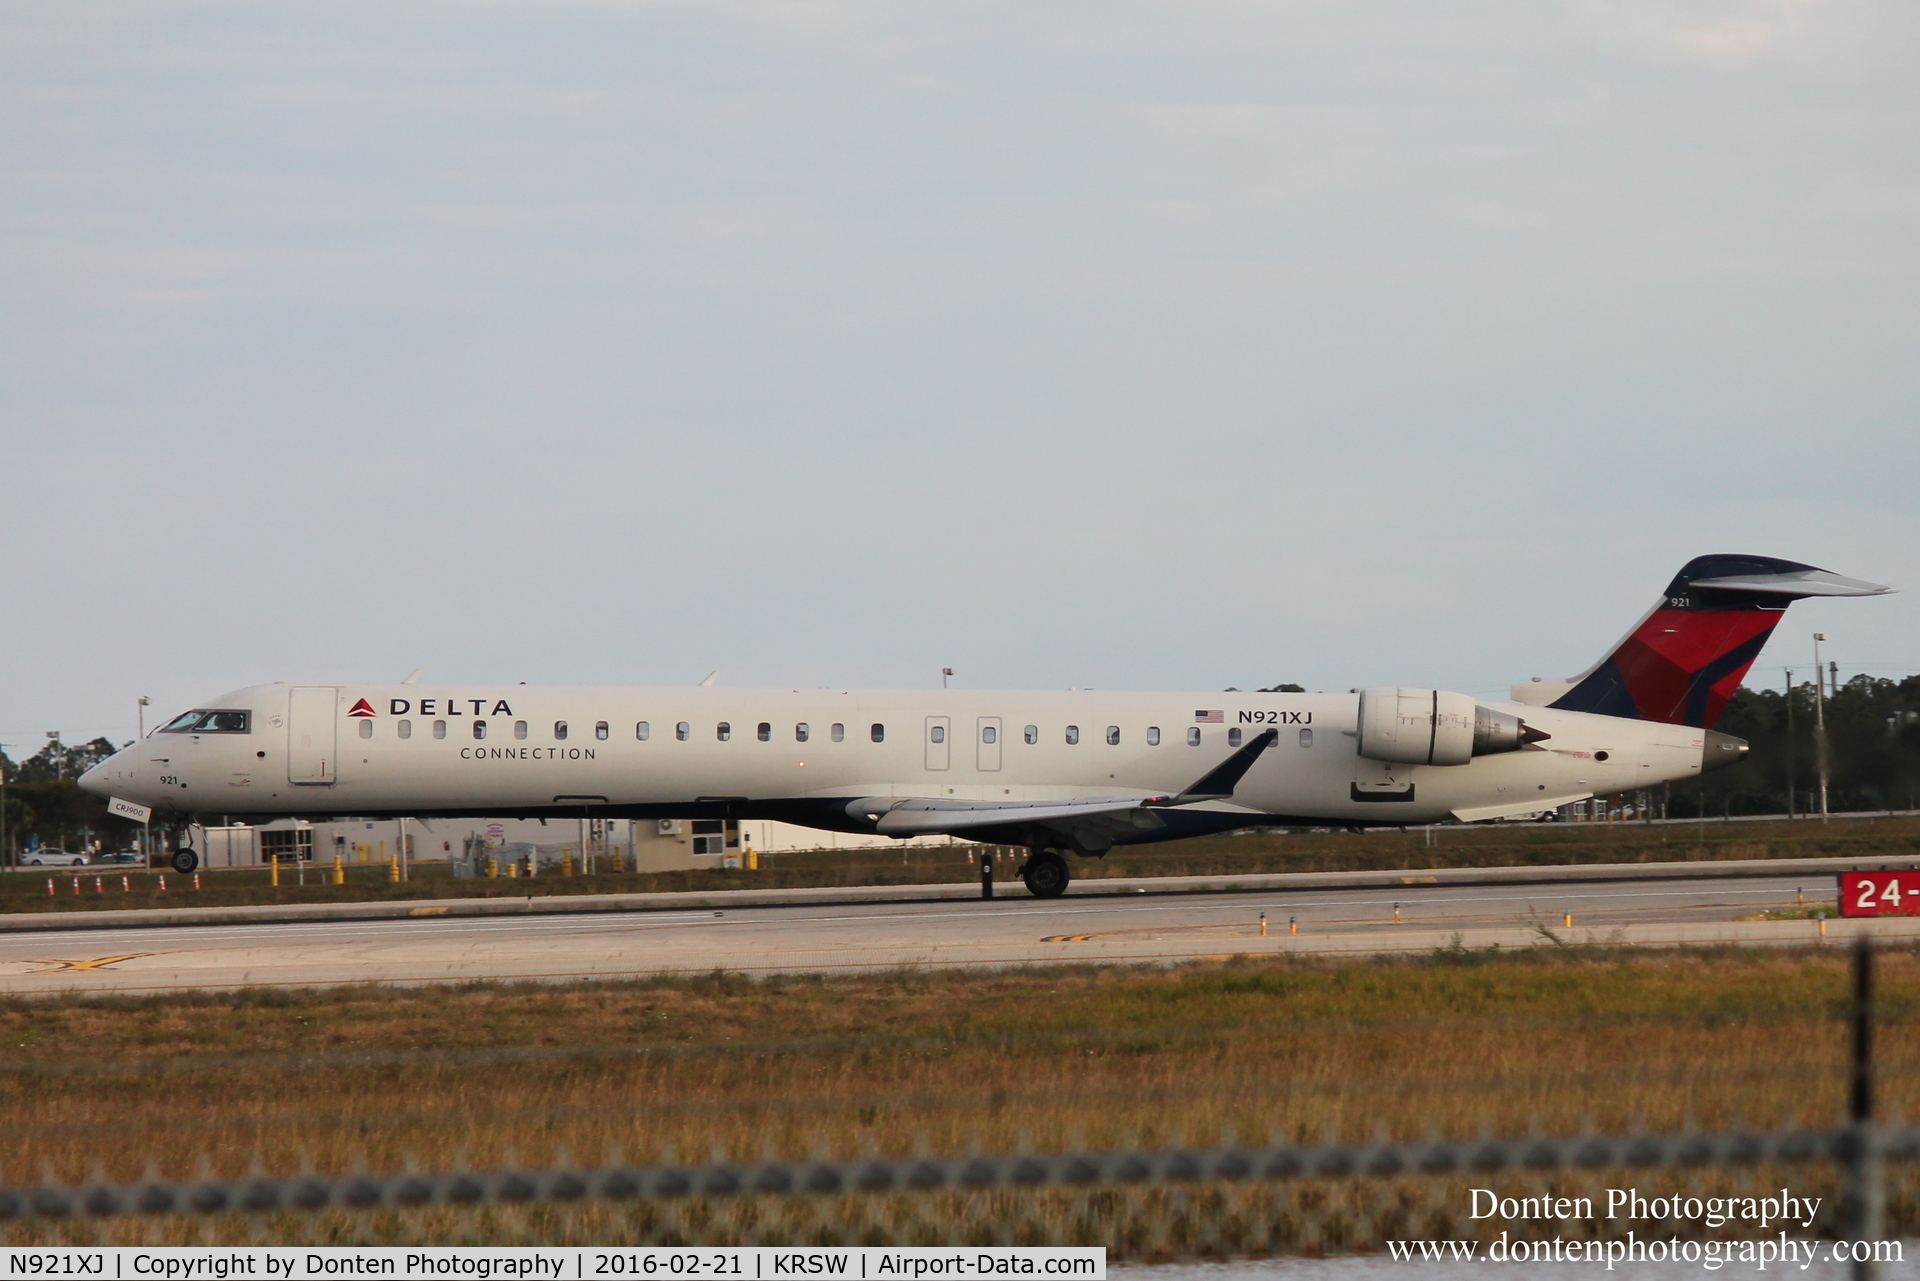 N921XJ, 2008 Bombardier CRJ-900ER (CL-600-2D24) C/N 15172, Delta Flight 4009 operated by Endeavor Air (N921XJ) arrives at Southwest Florida International Airport following flight from LaGuardia Airport